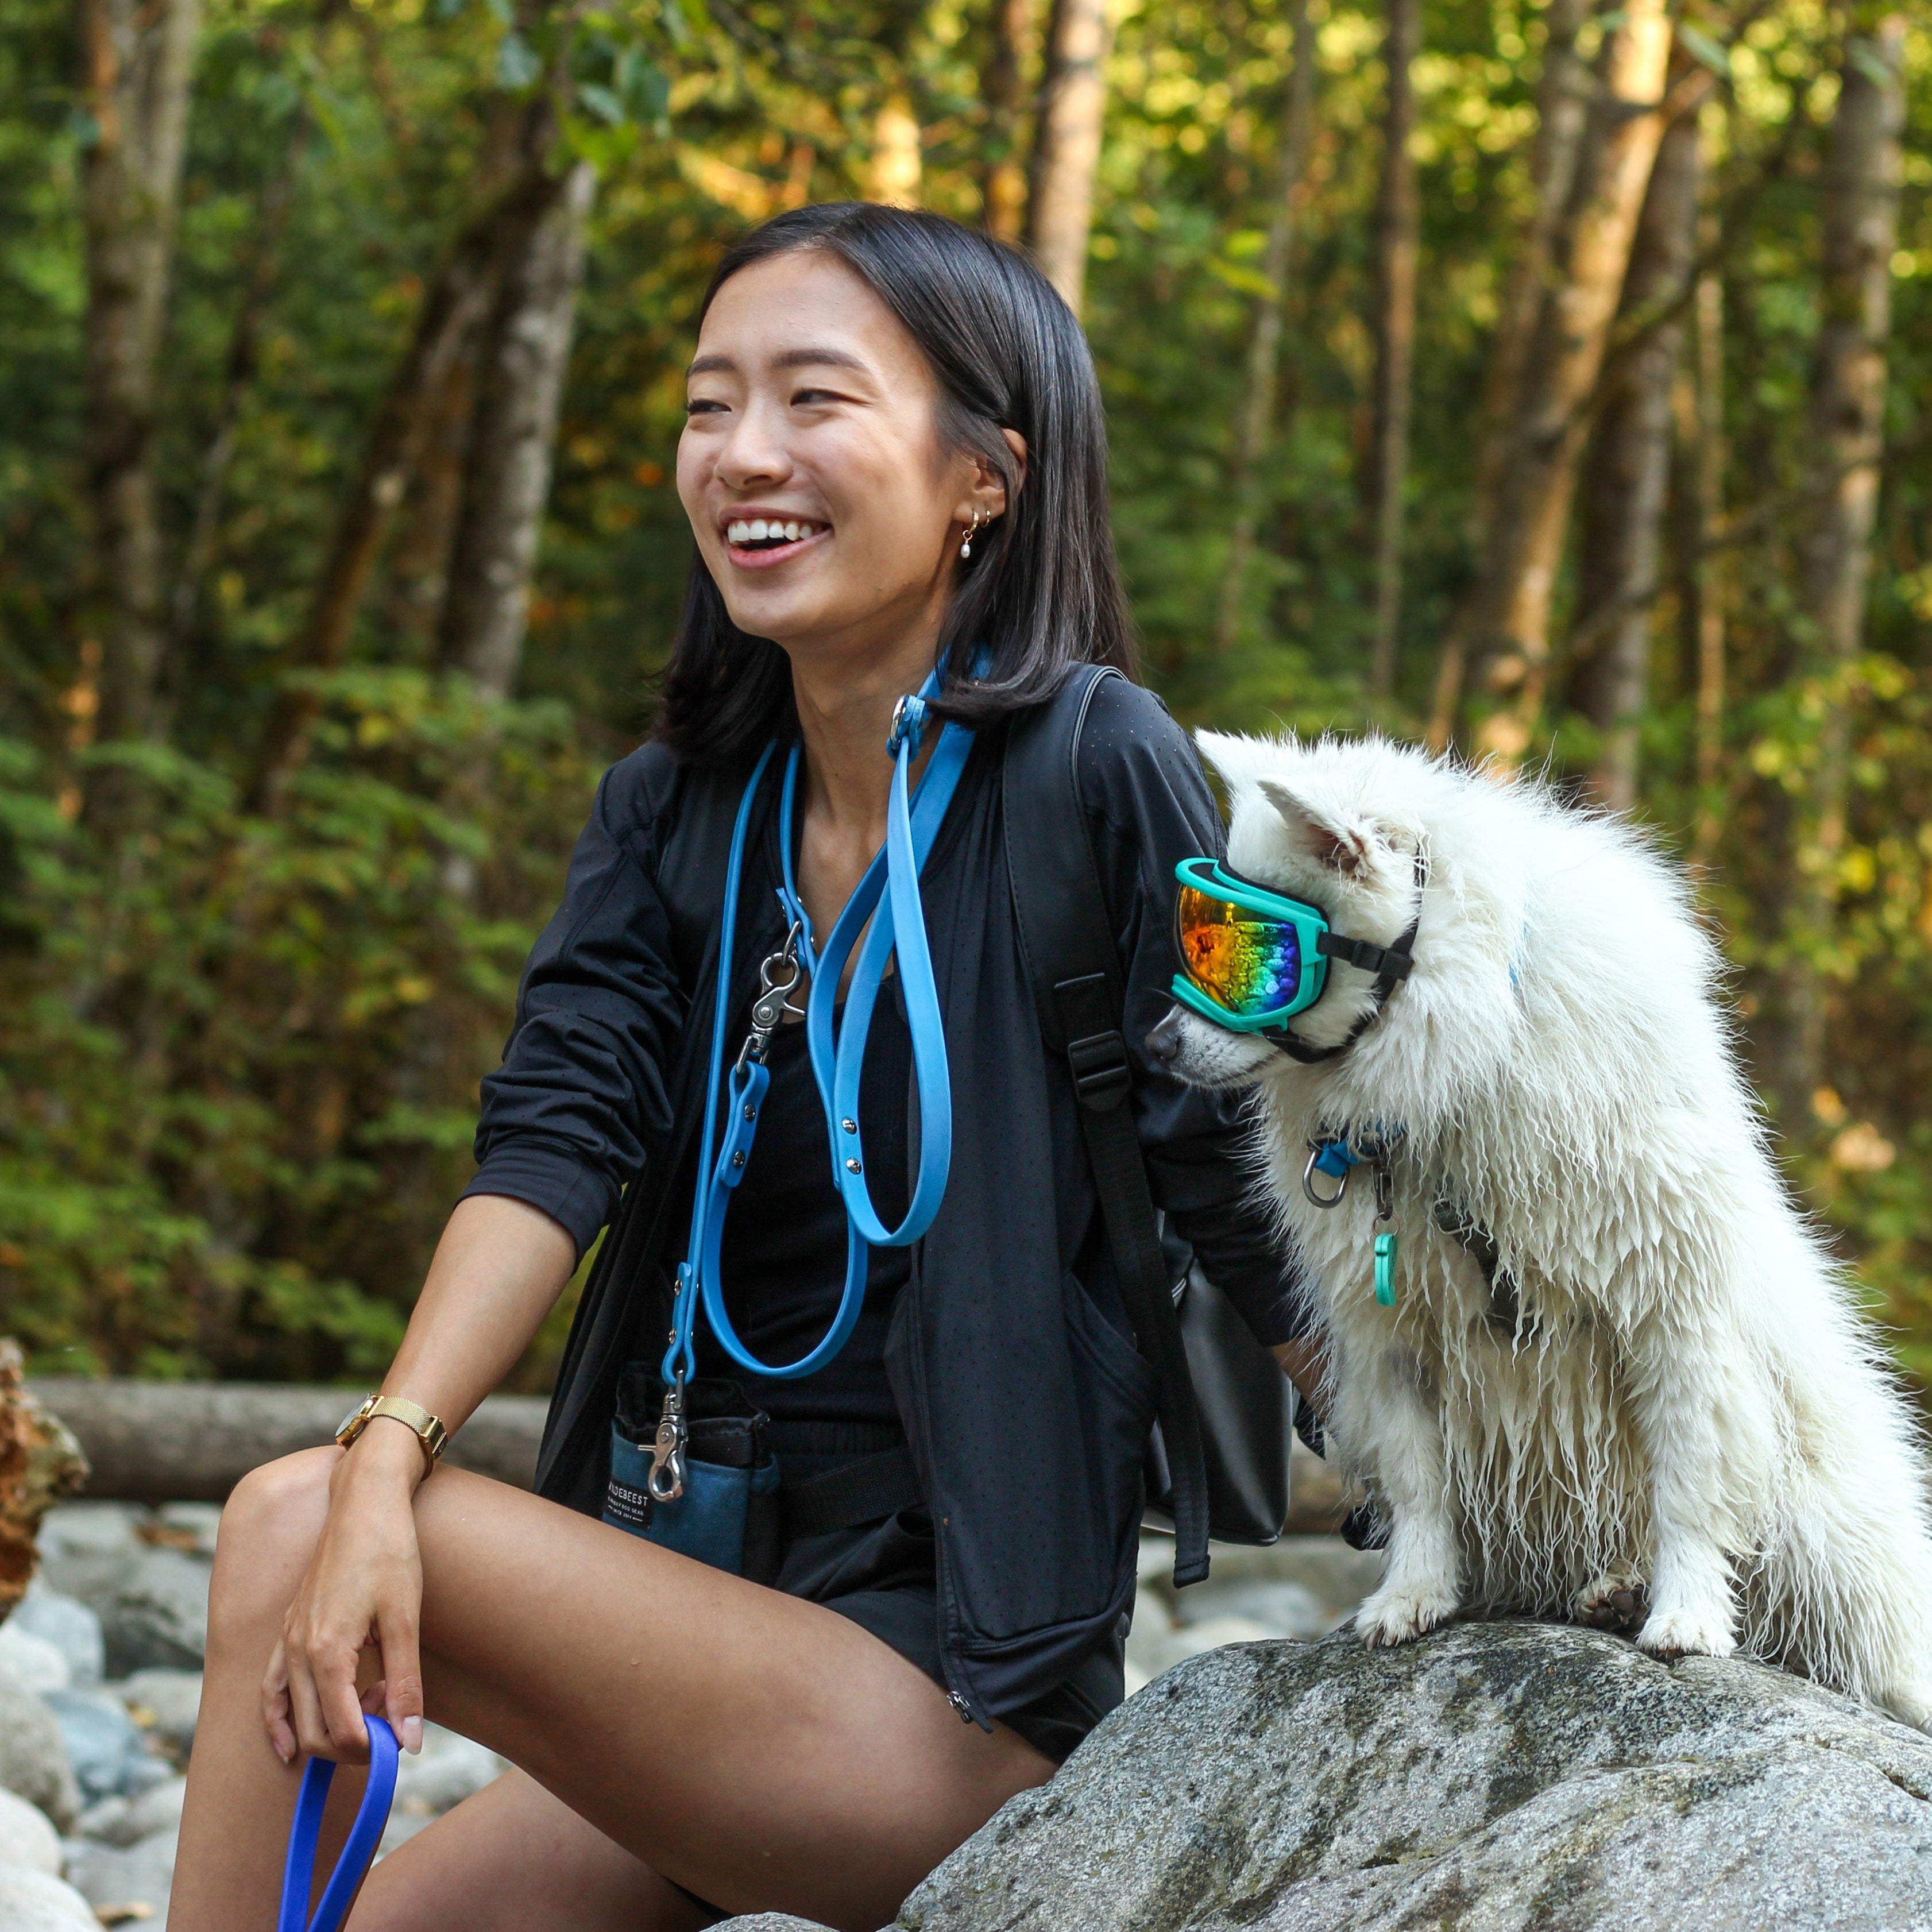 Woman sitting on a rock with her dog with a Blue 6' Hands-Free Waterproof Biothane Dog Leash around her neck